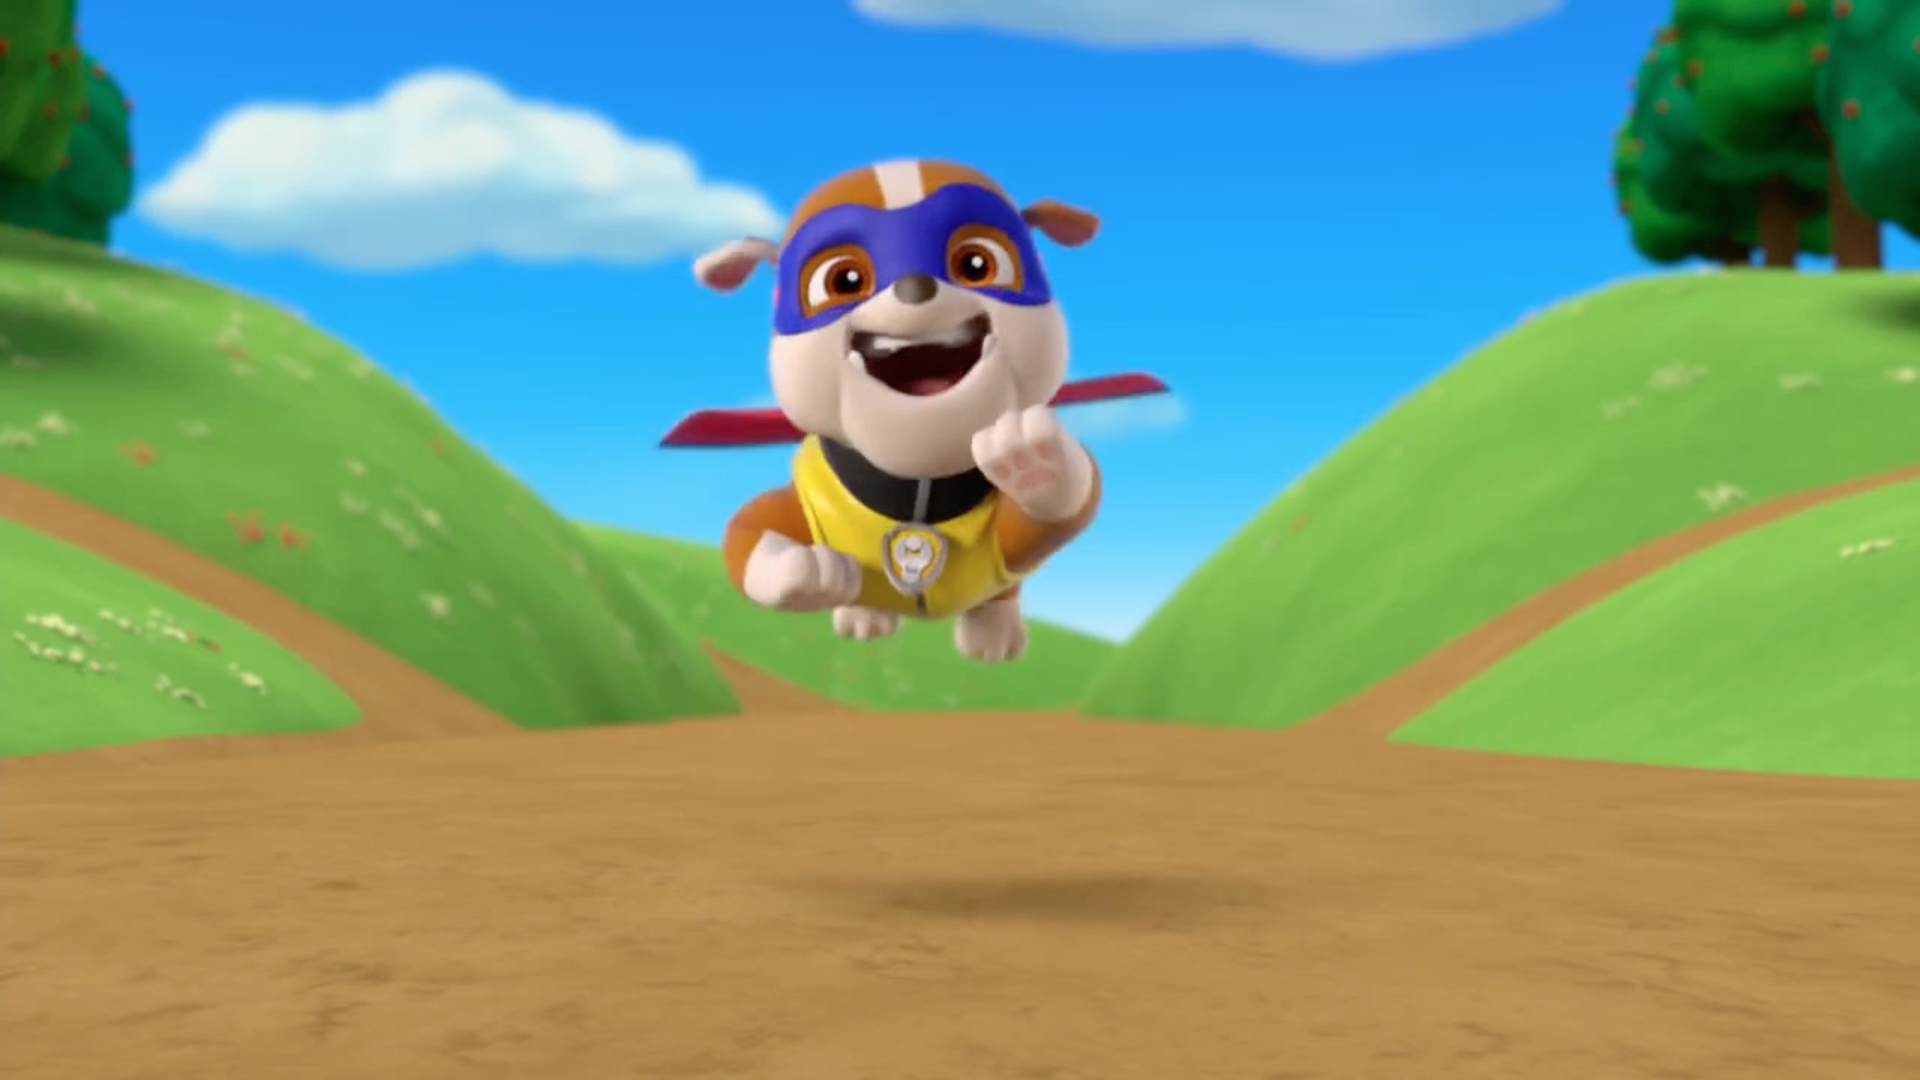 Save Super Pup/Quotes | PAW Patrol Wiki | Fandom